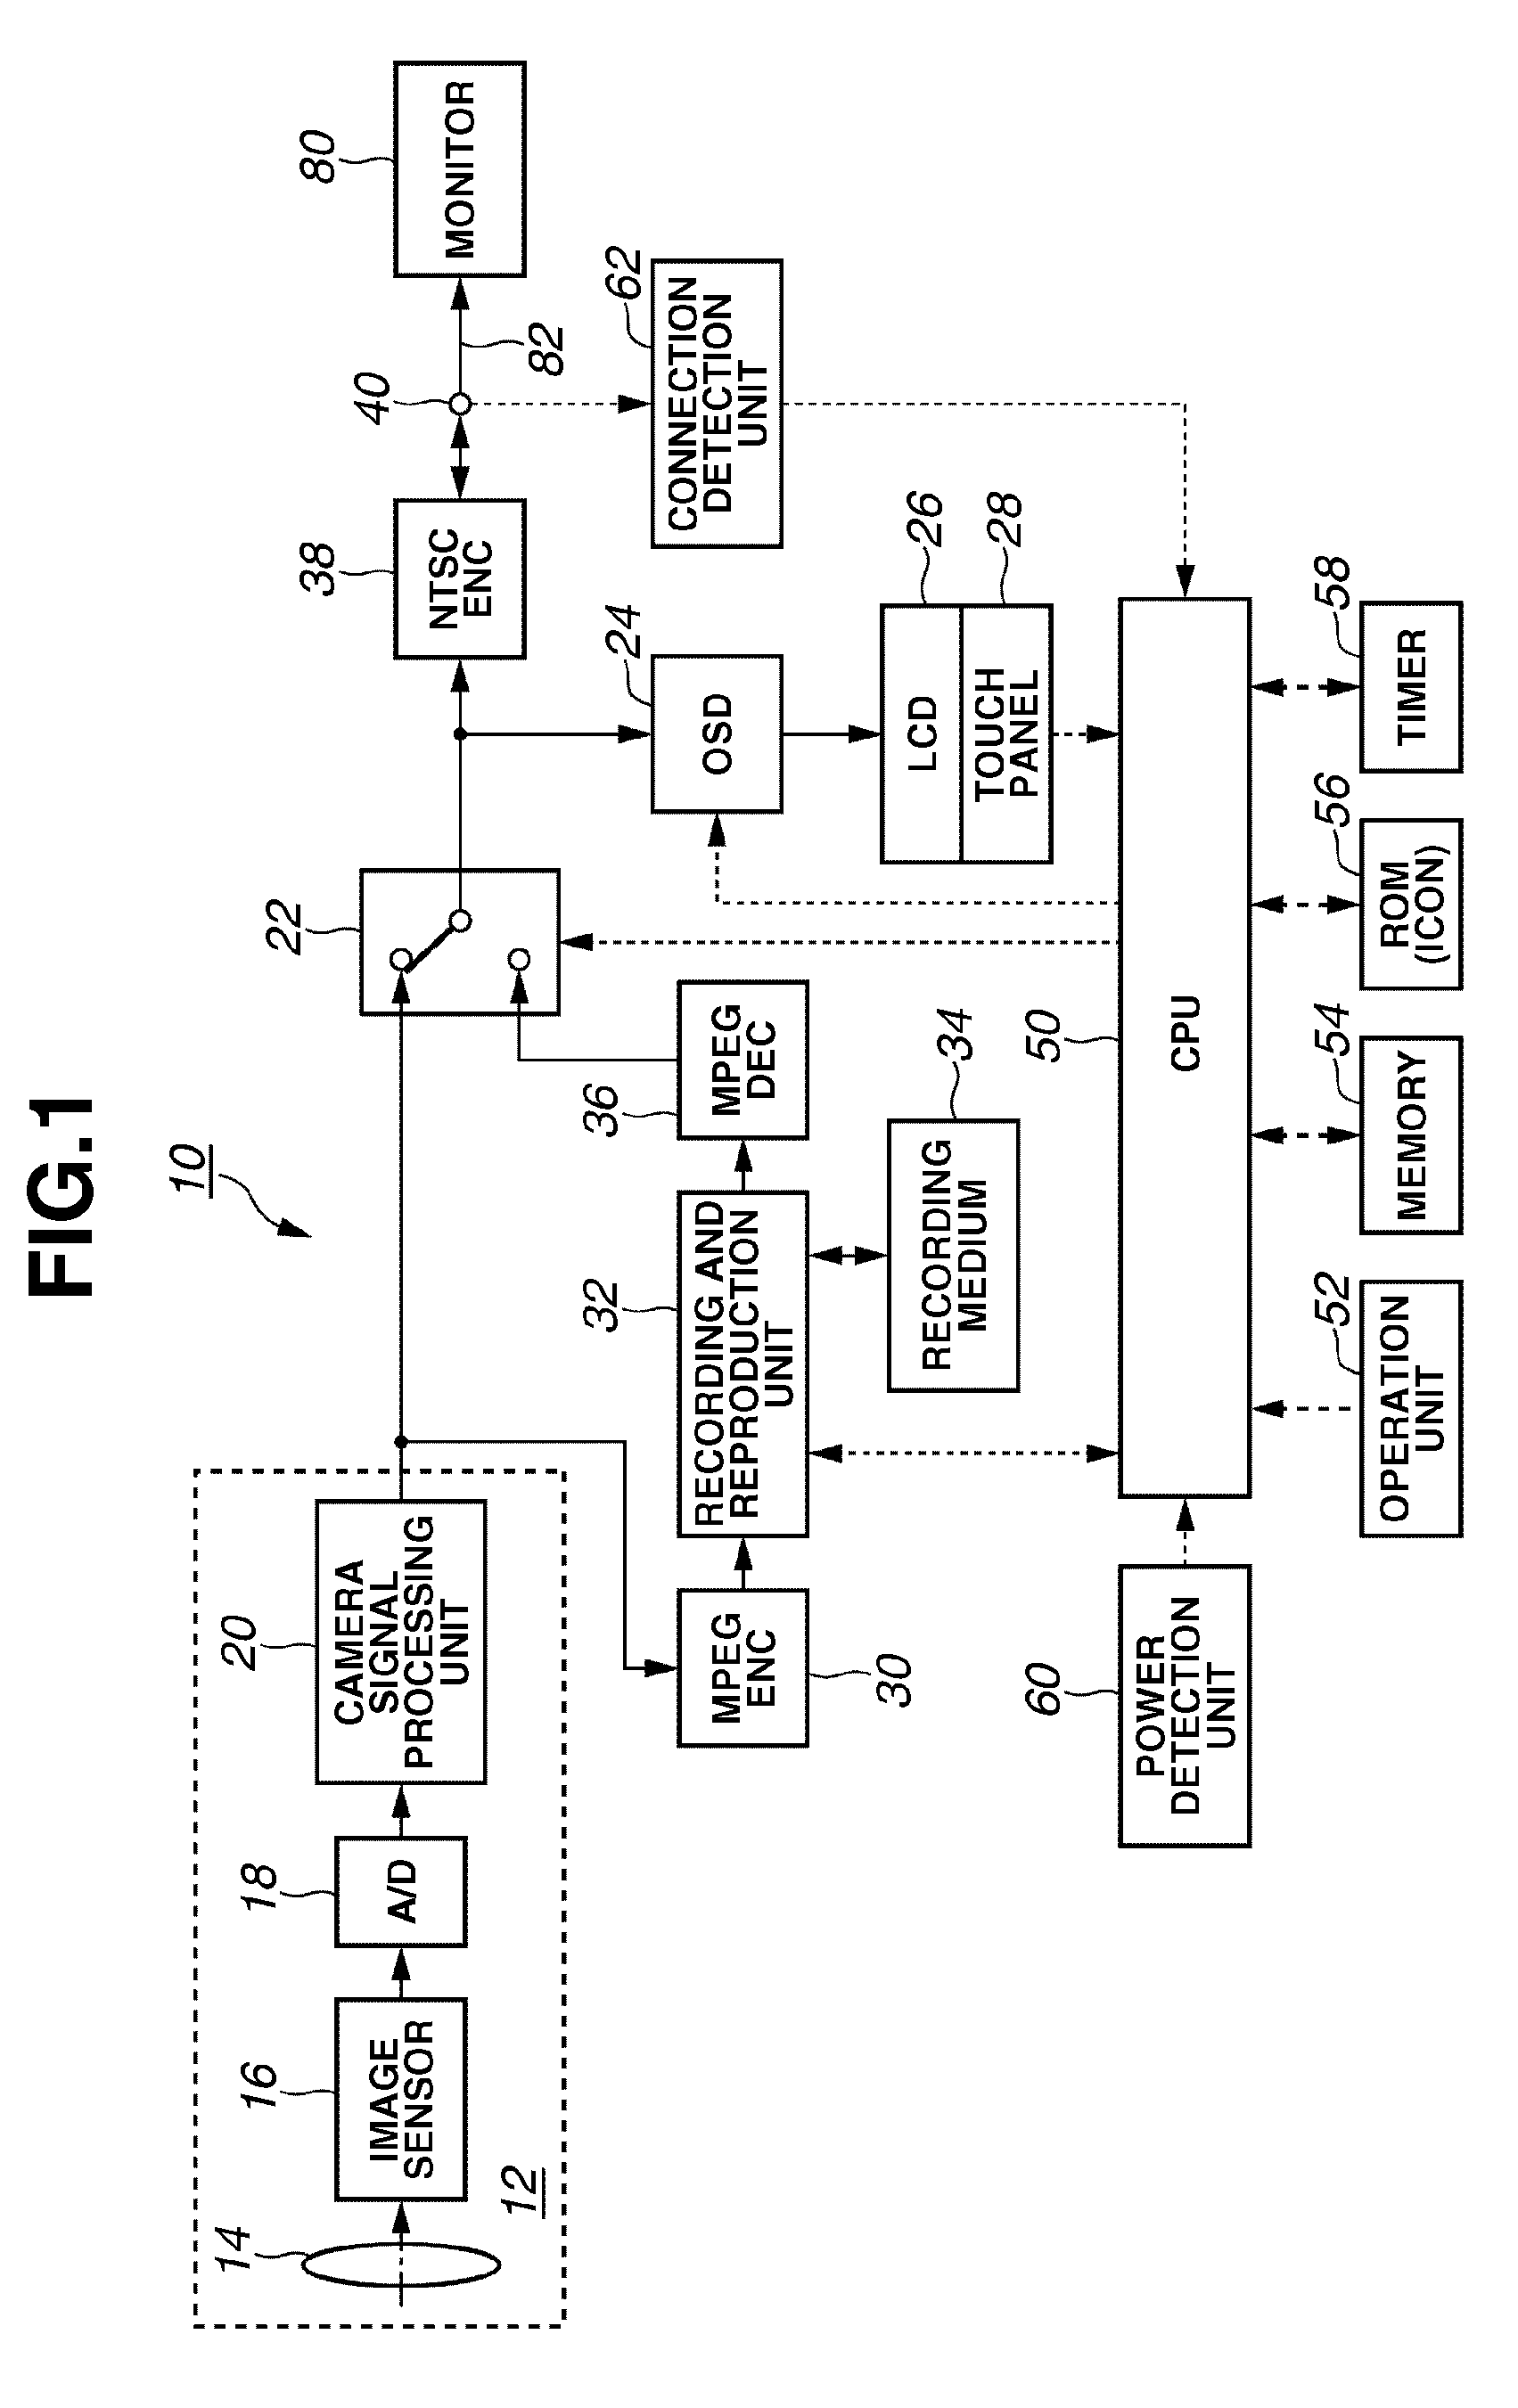 Image reproducing apparatus and method of controlling the image reproducing apparatus